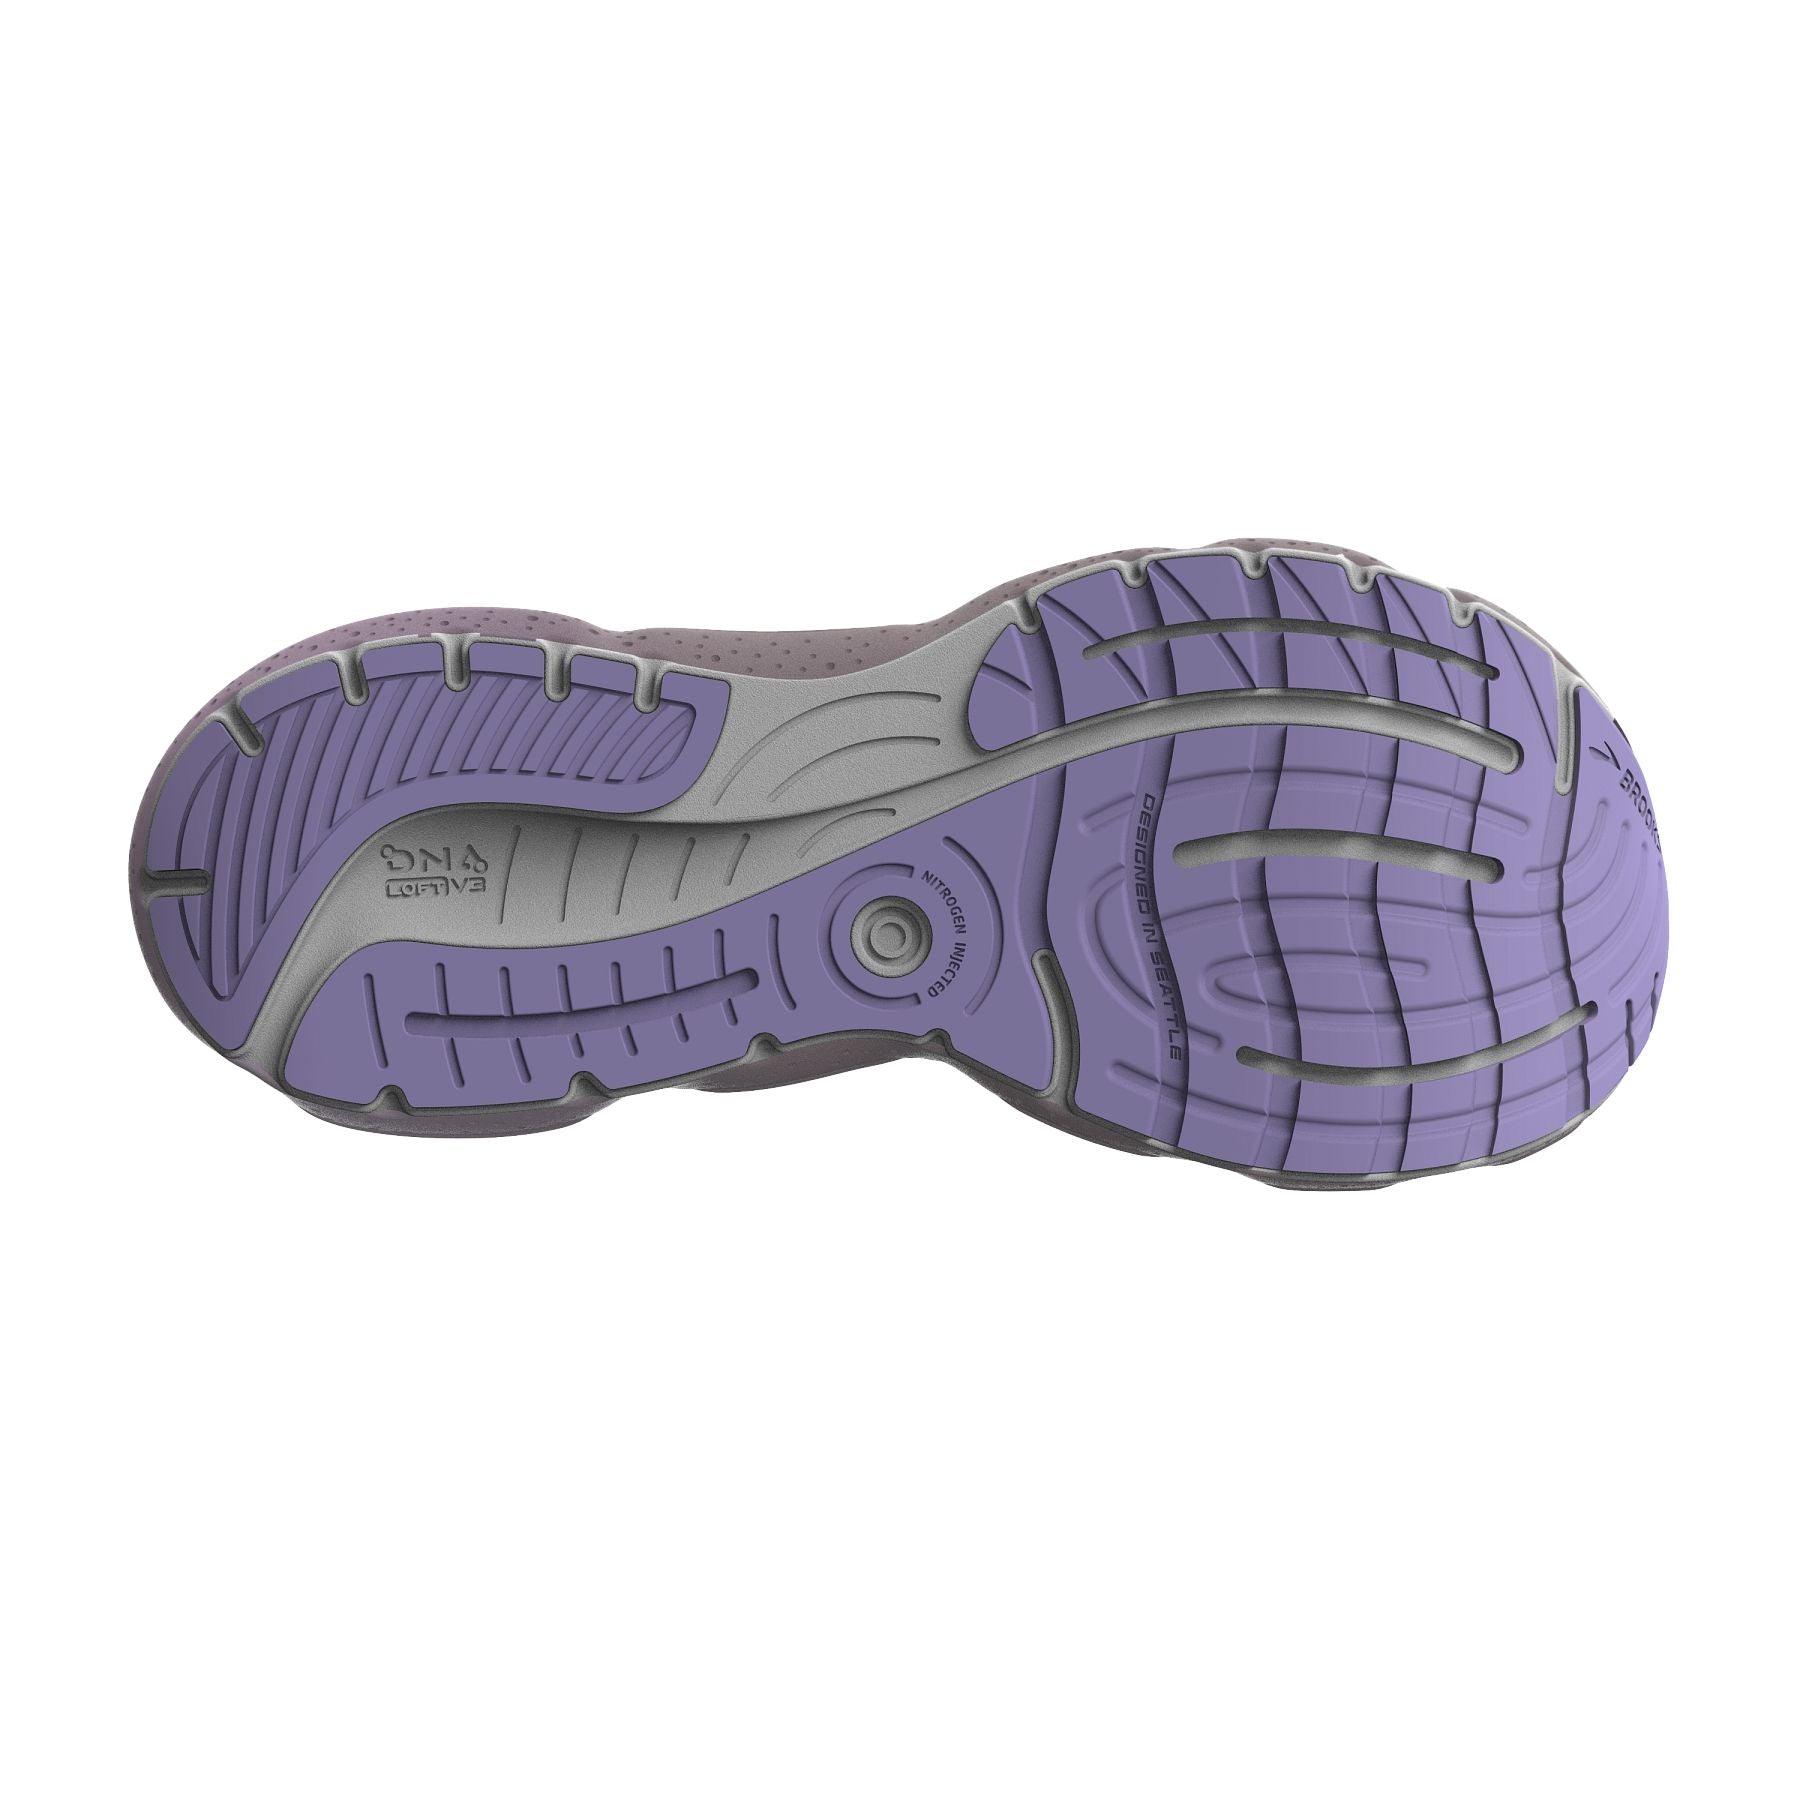 Bottom (outer sole) view of the Women's Glycerin 20 by Brooks in the color White/Orchid Lavender